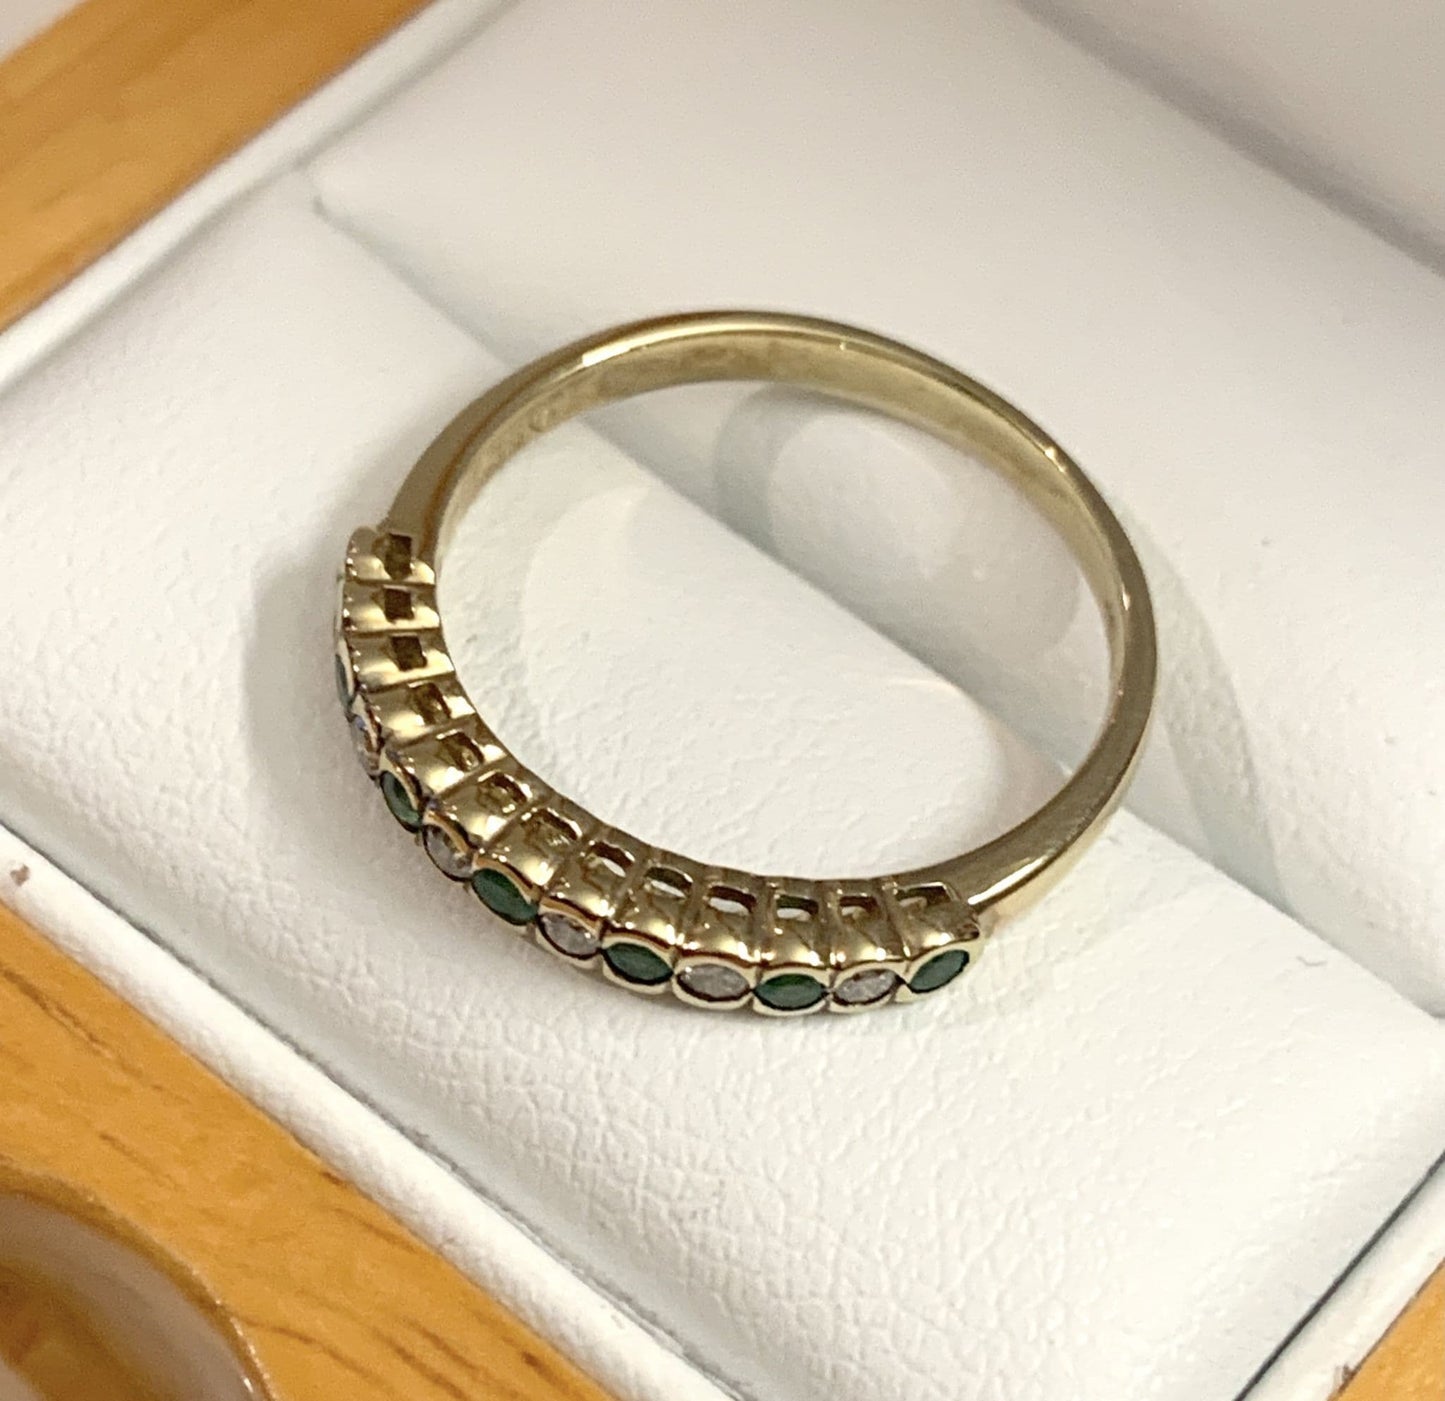 Green Emerald And Diamond Smooth Rubbed Over Eternity Ring